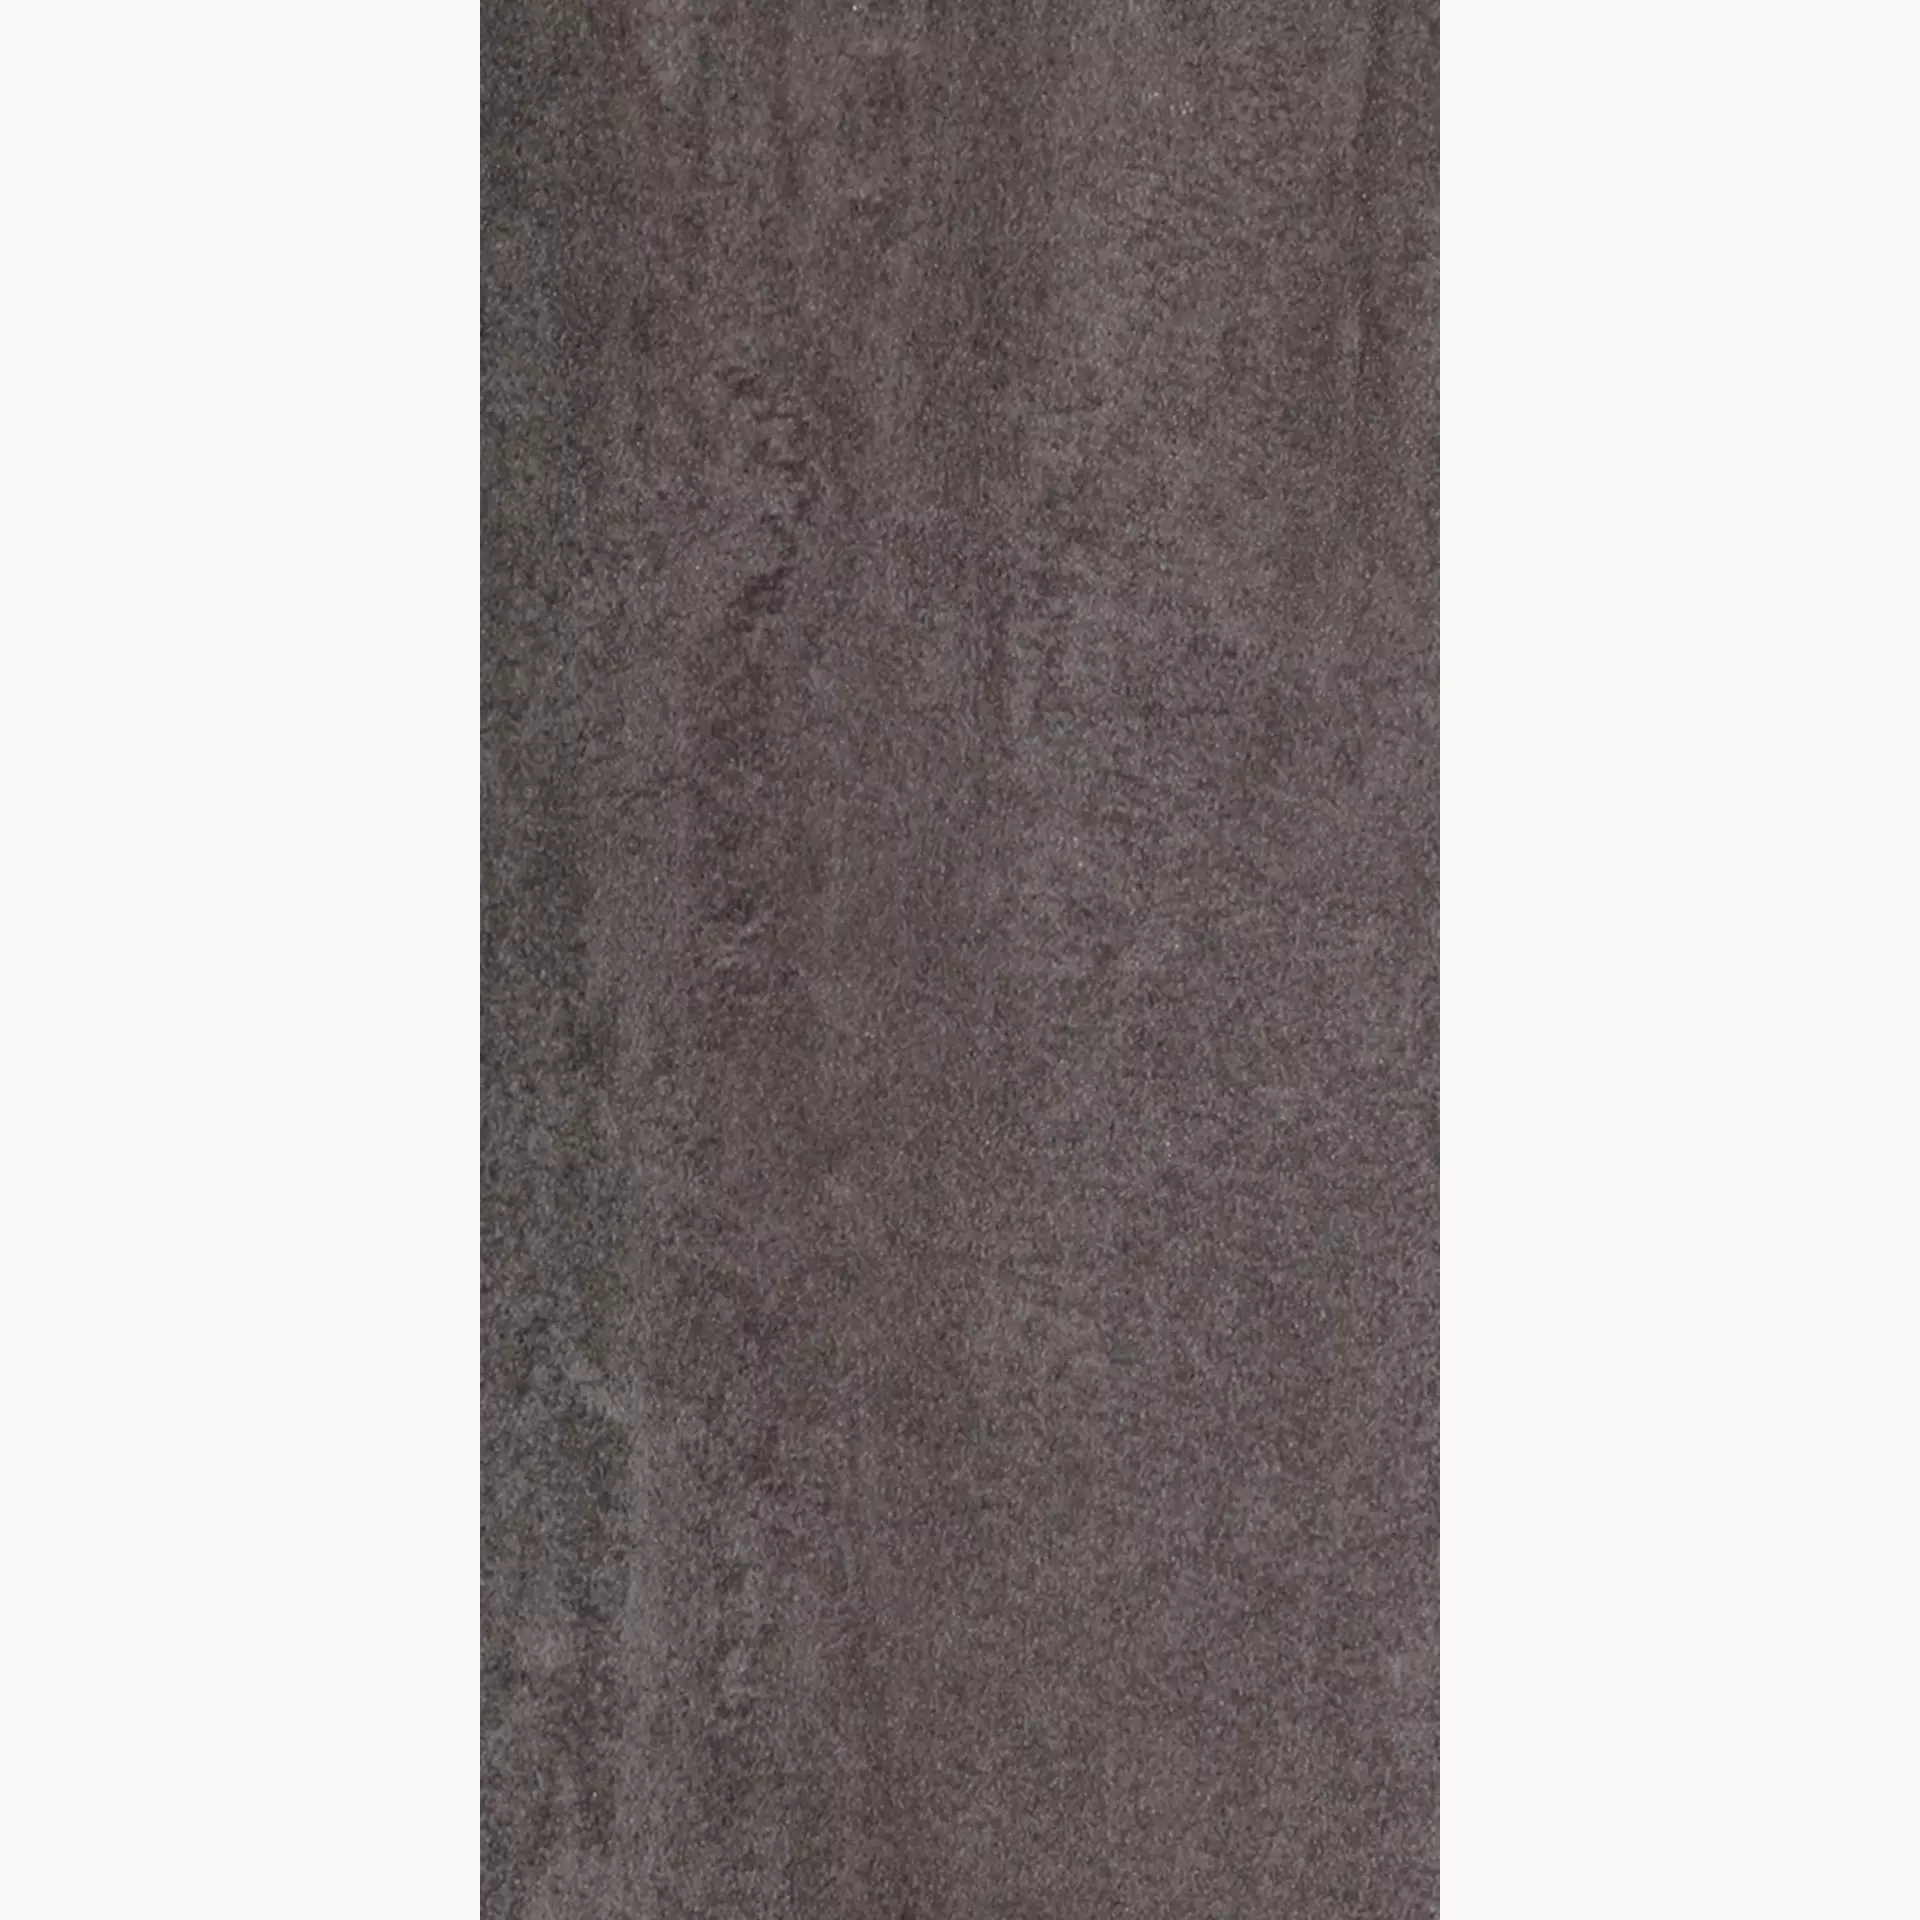 Rondine Contract Grey Naturale J83705 30x60cm rectified 9,5mm